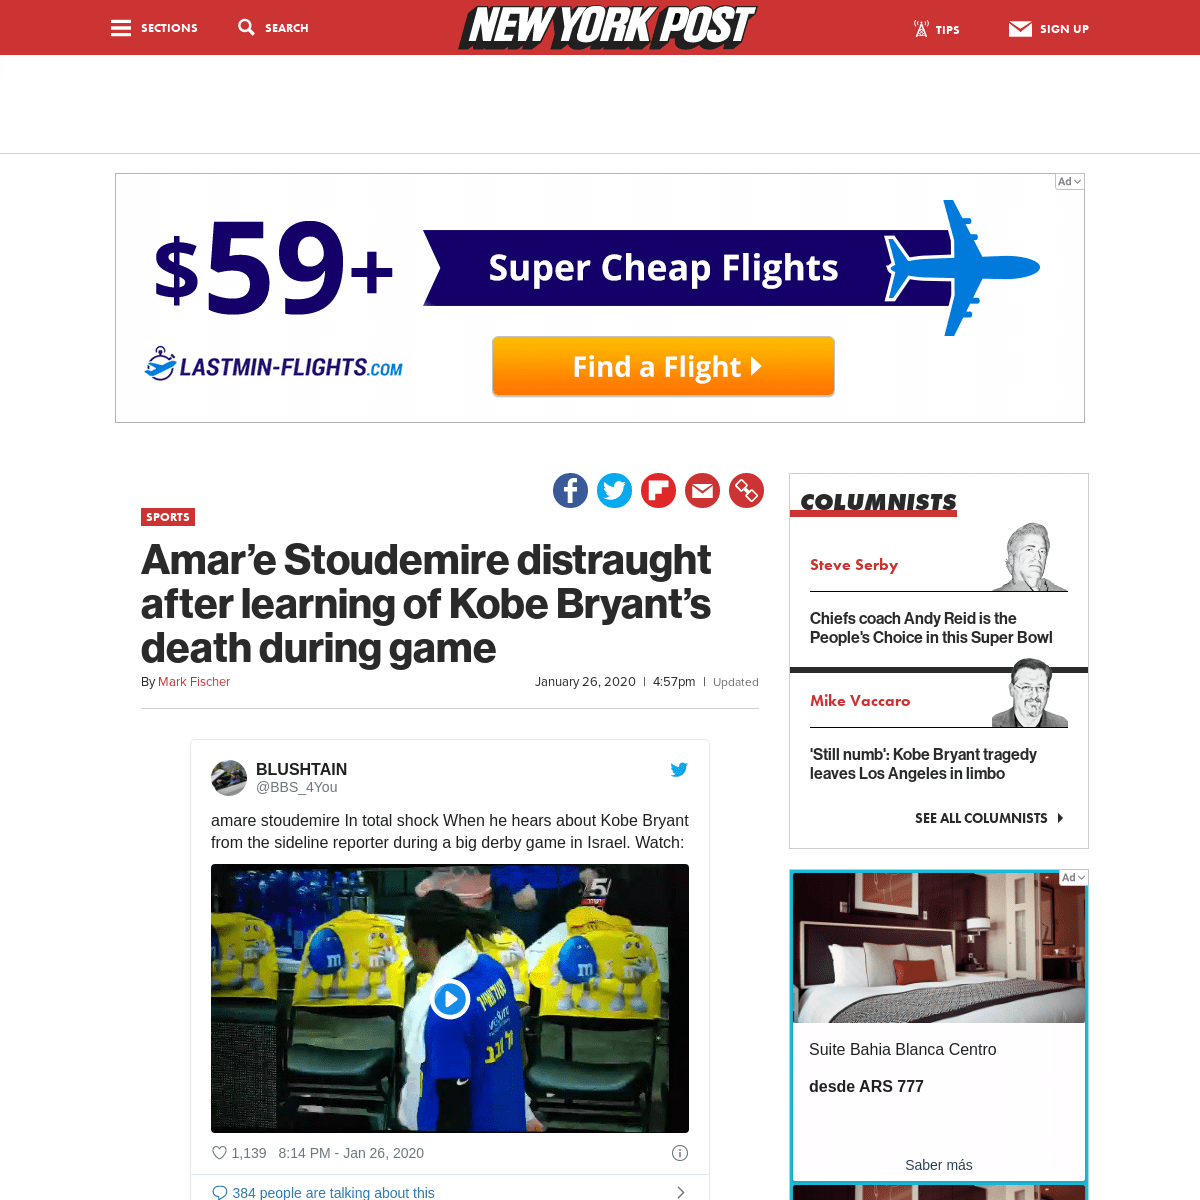 A complete backup of nypost.com/2020/01/26/kobe-bryant-dead-amare-stoudemire-heartbroken-after-learning-of-crash-during-game/